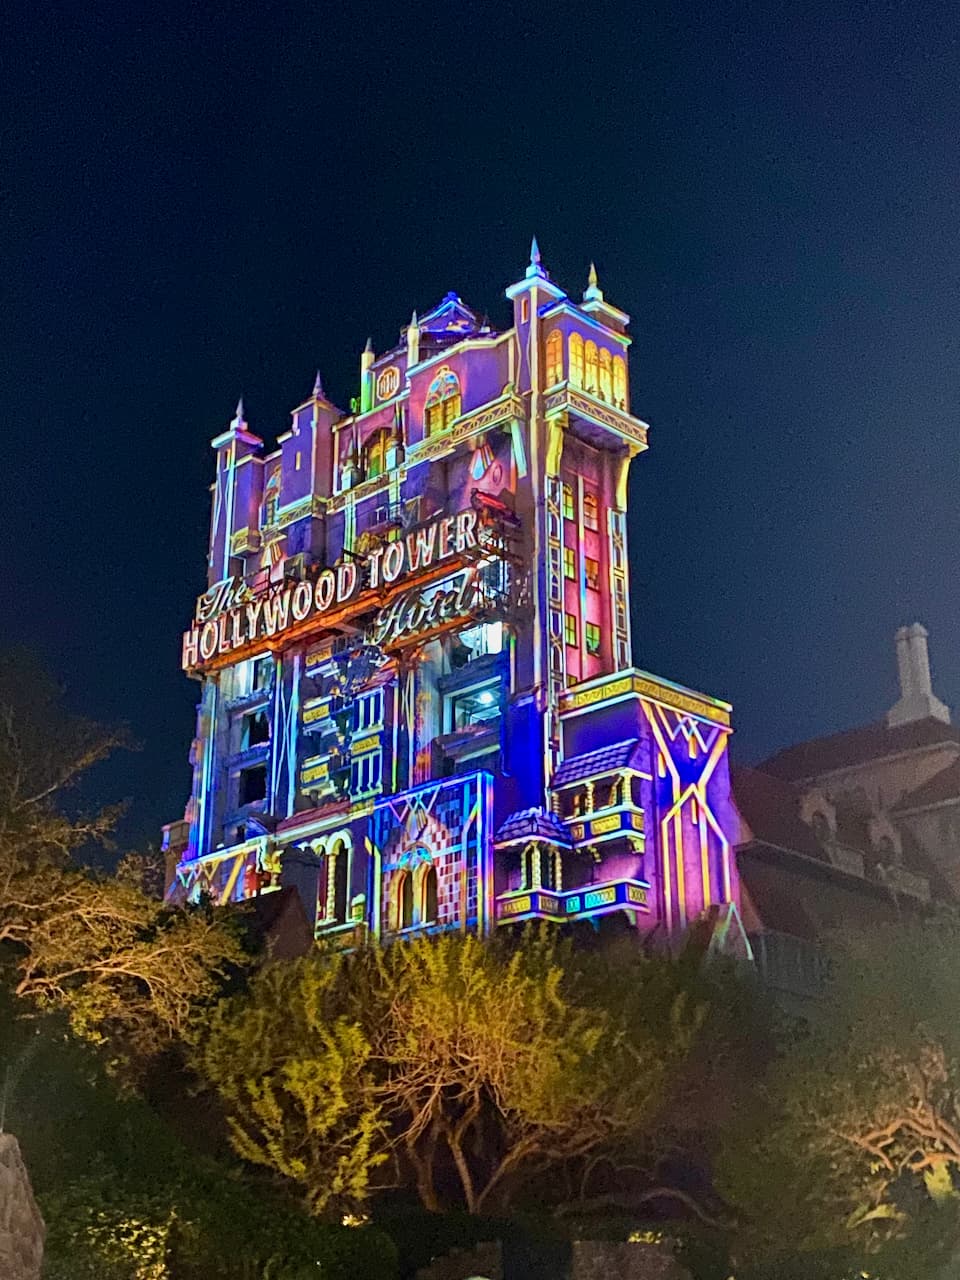 Hollywood Tower of Terror at night lit up with lights